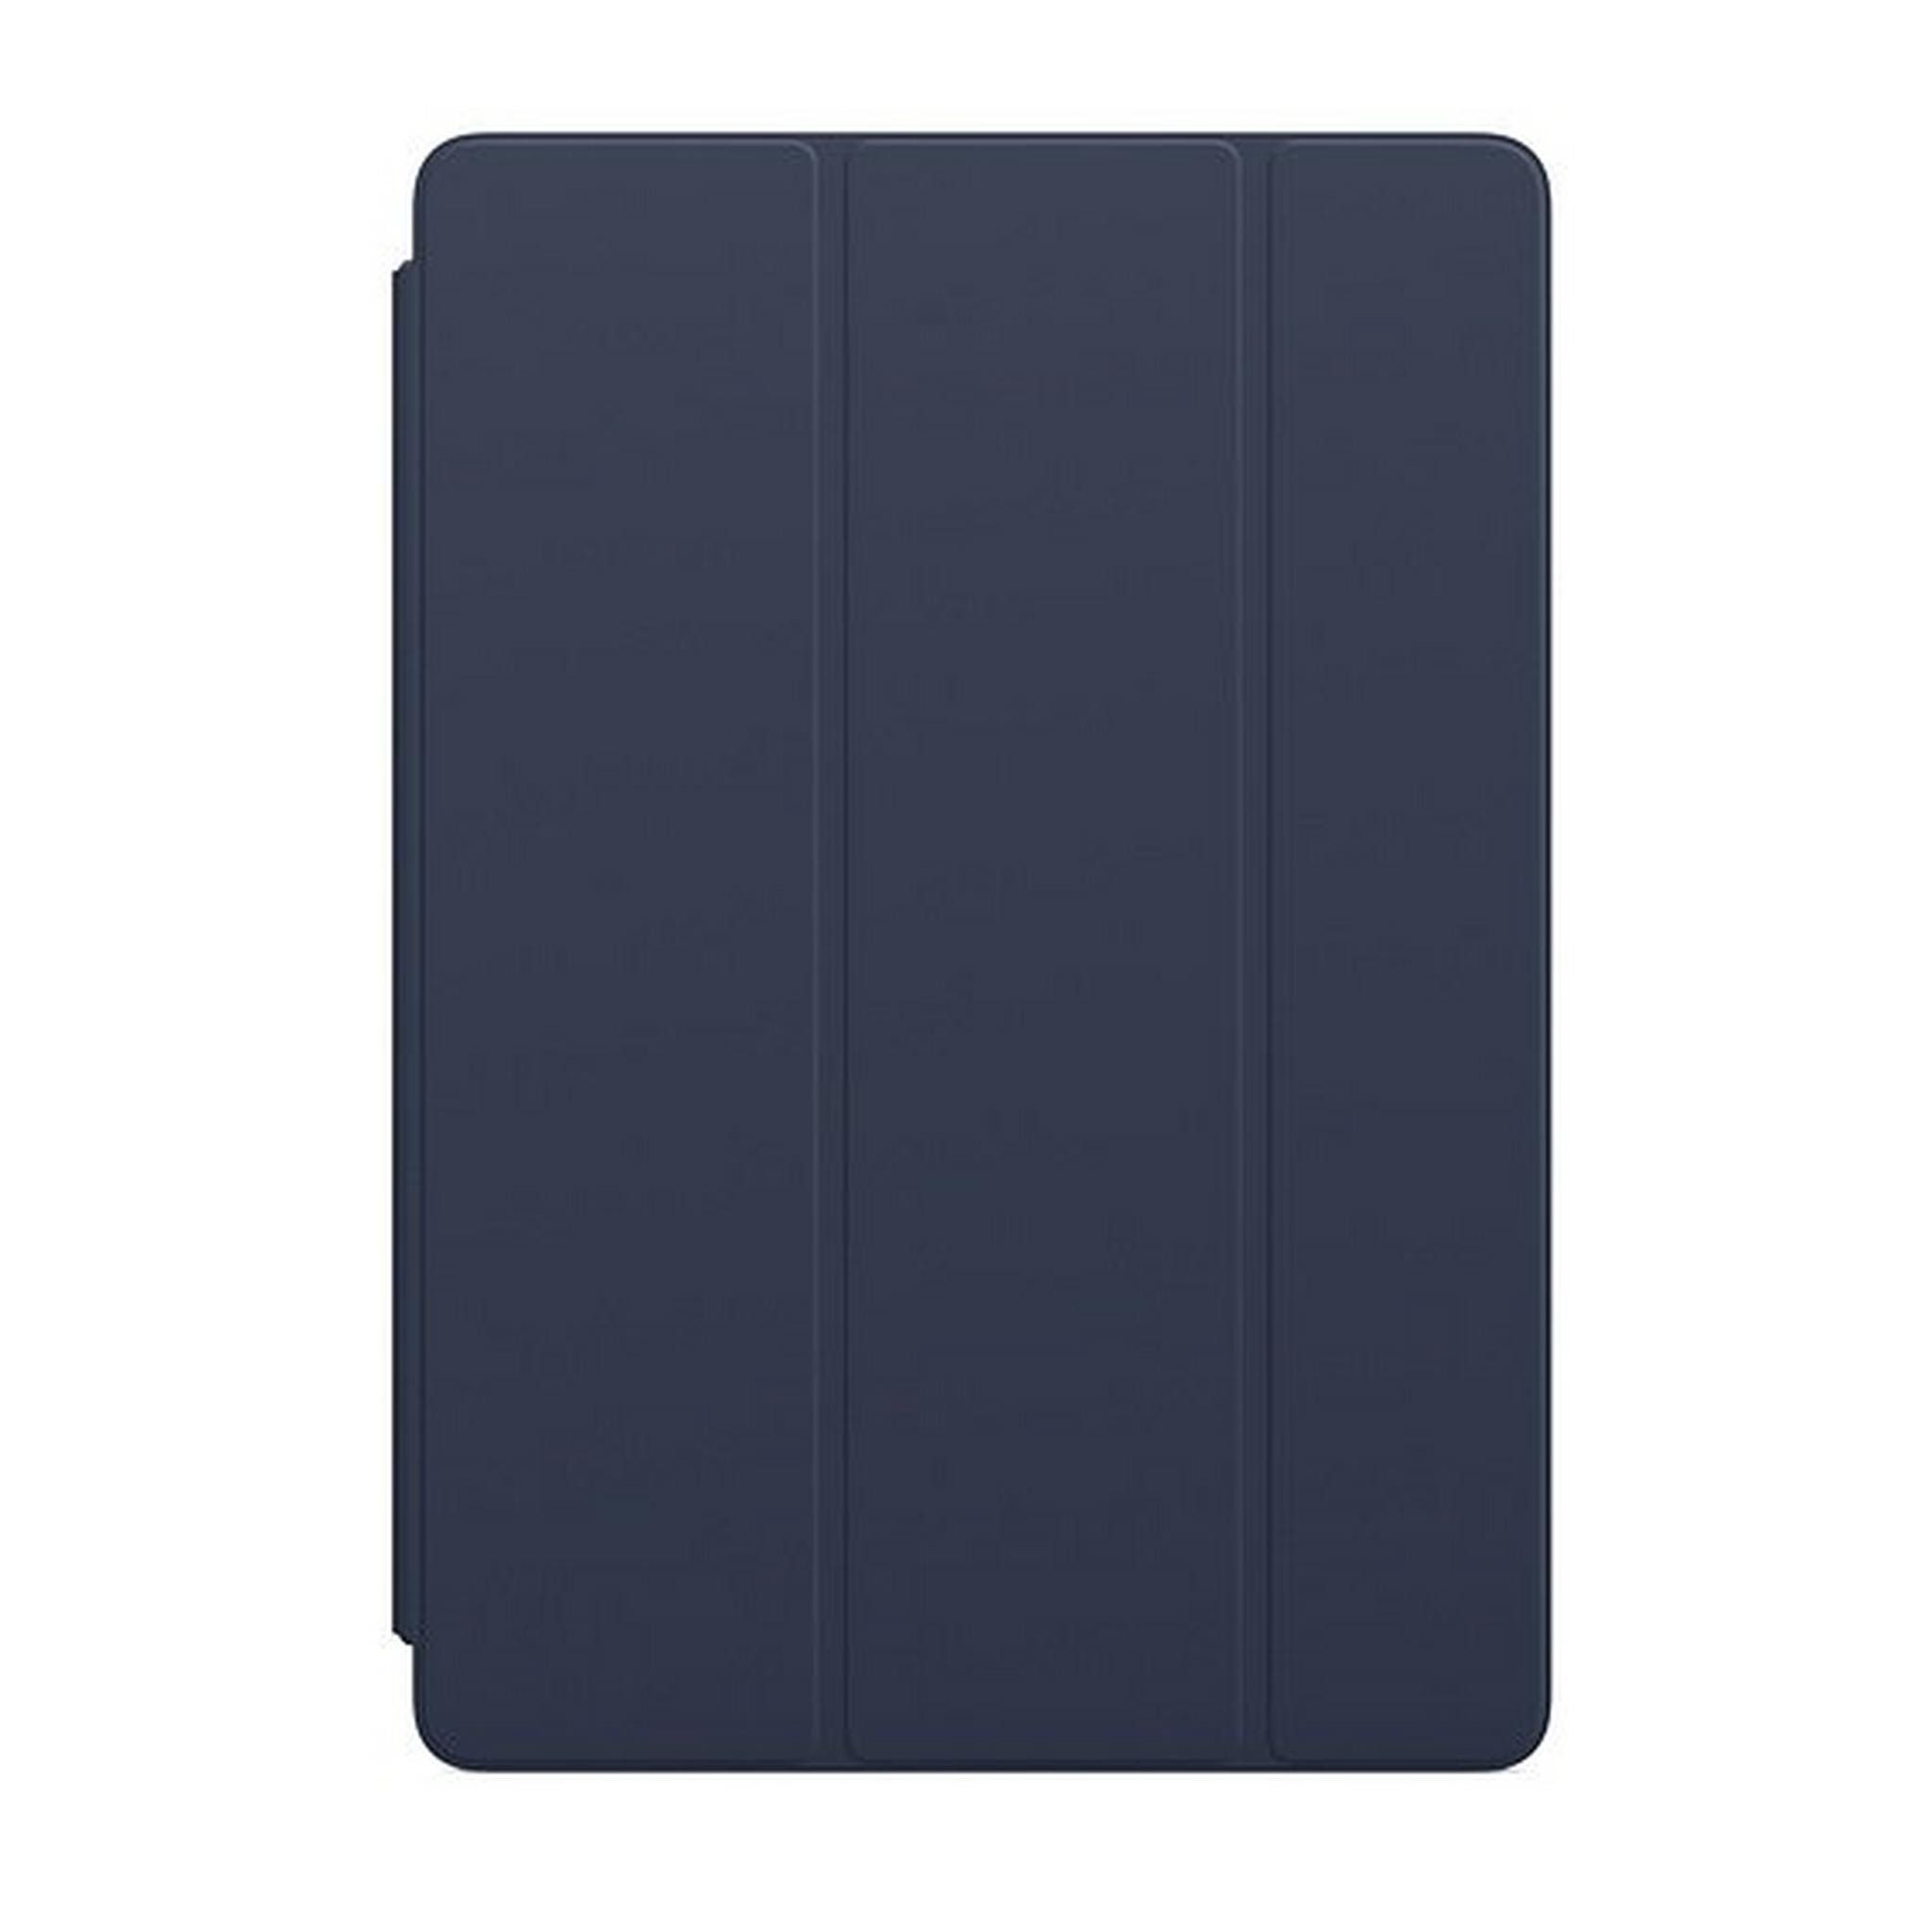 Apple Smart Cover for iPad - 8th Generation - Deep Navy